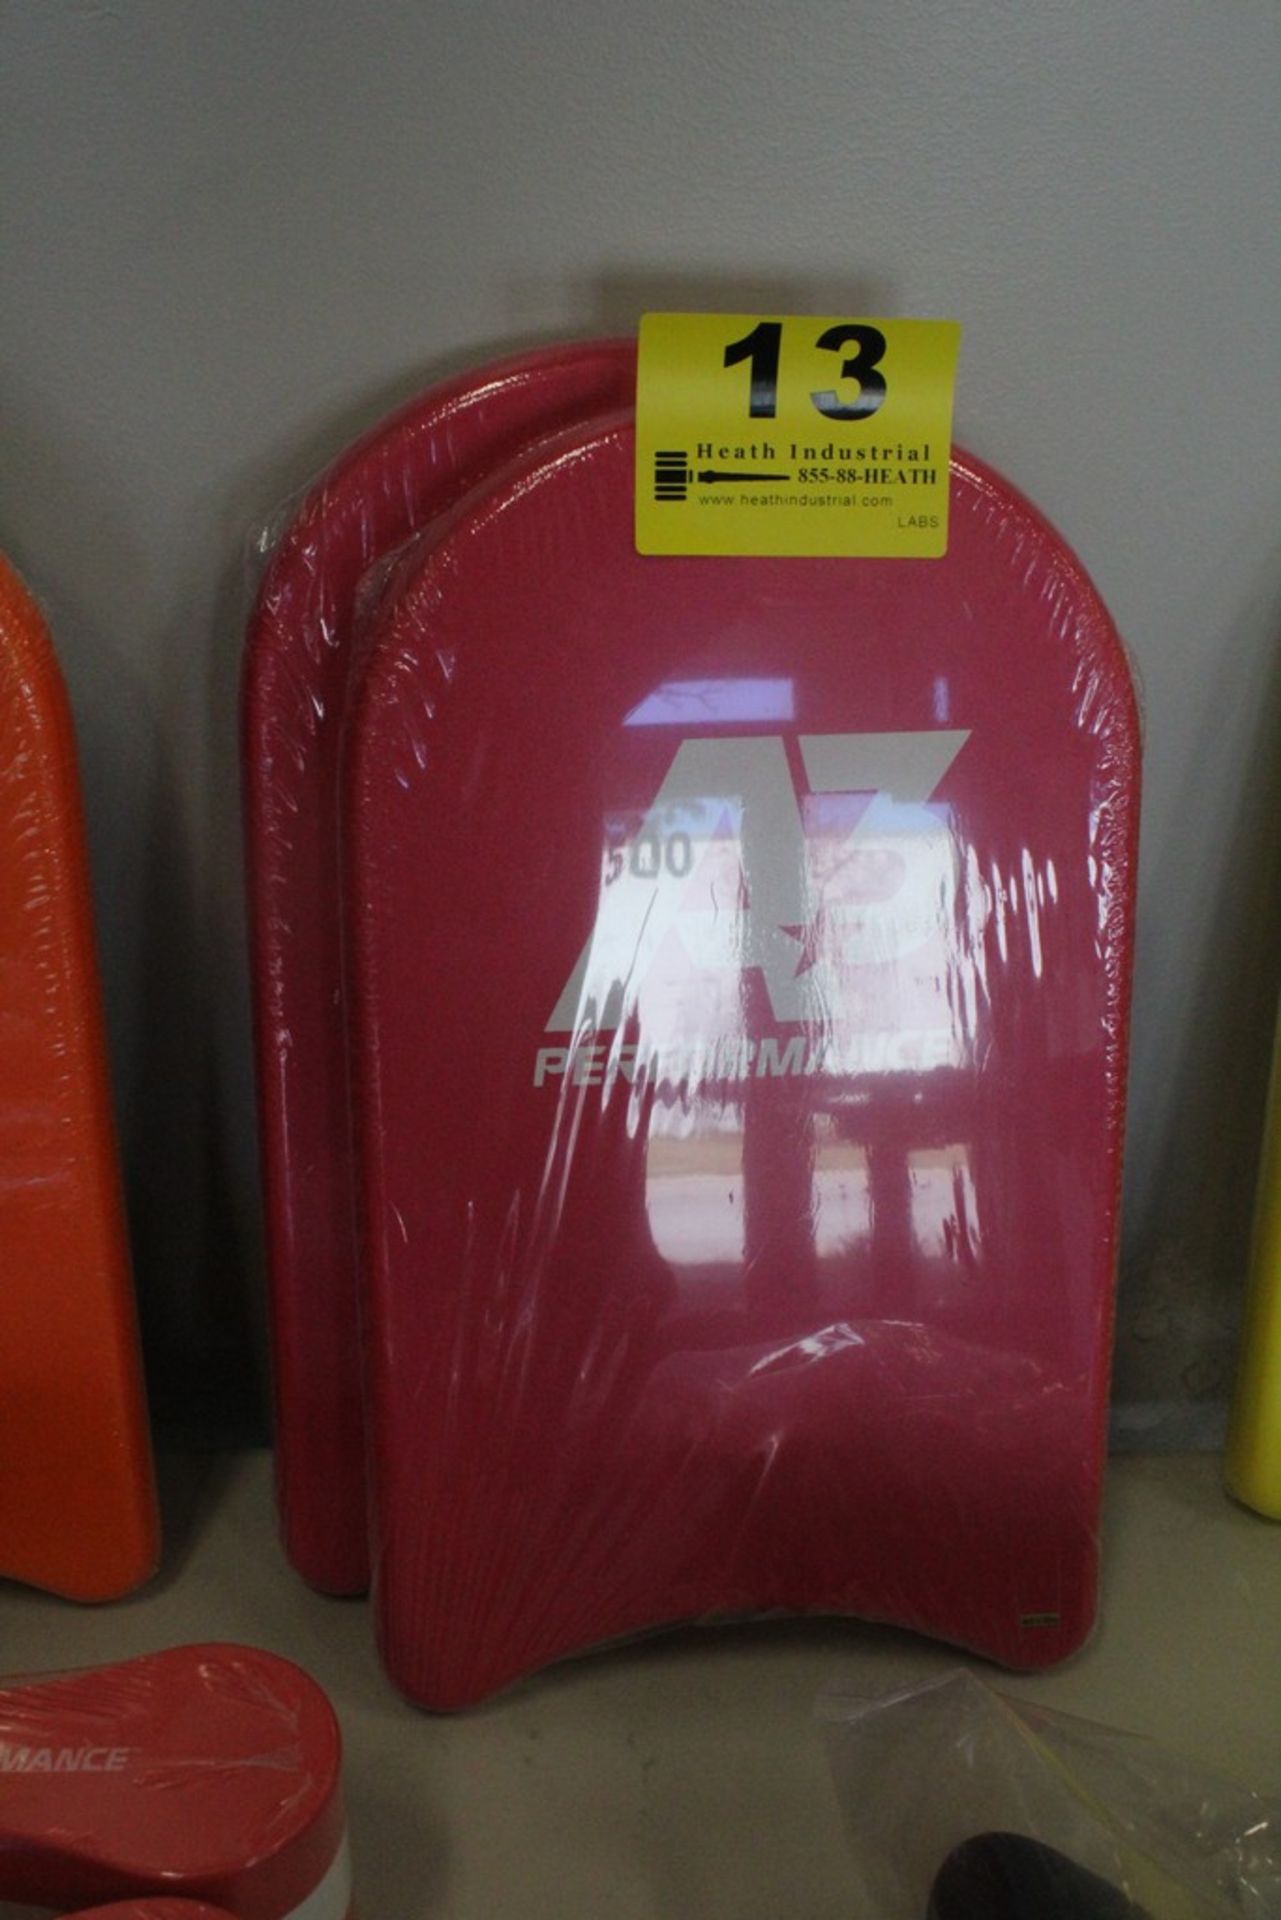 (2) A3 PERFORMANCE KICK BOARDS, PINK